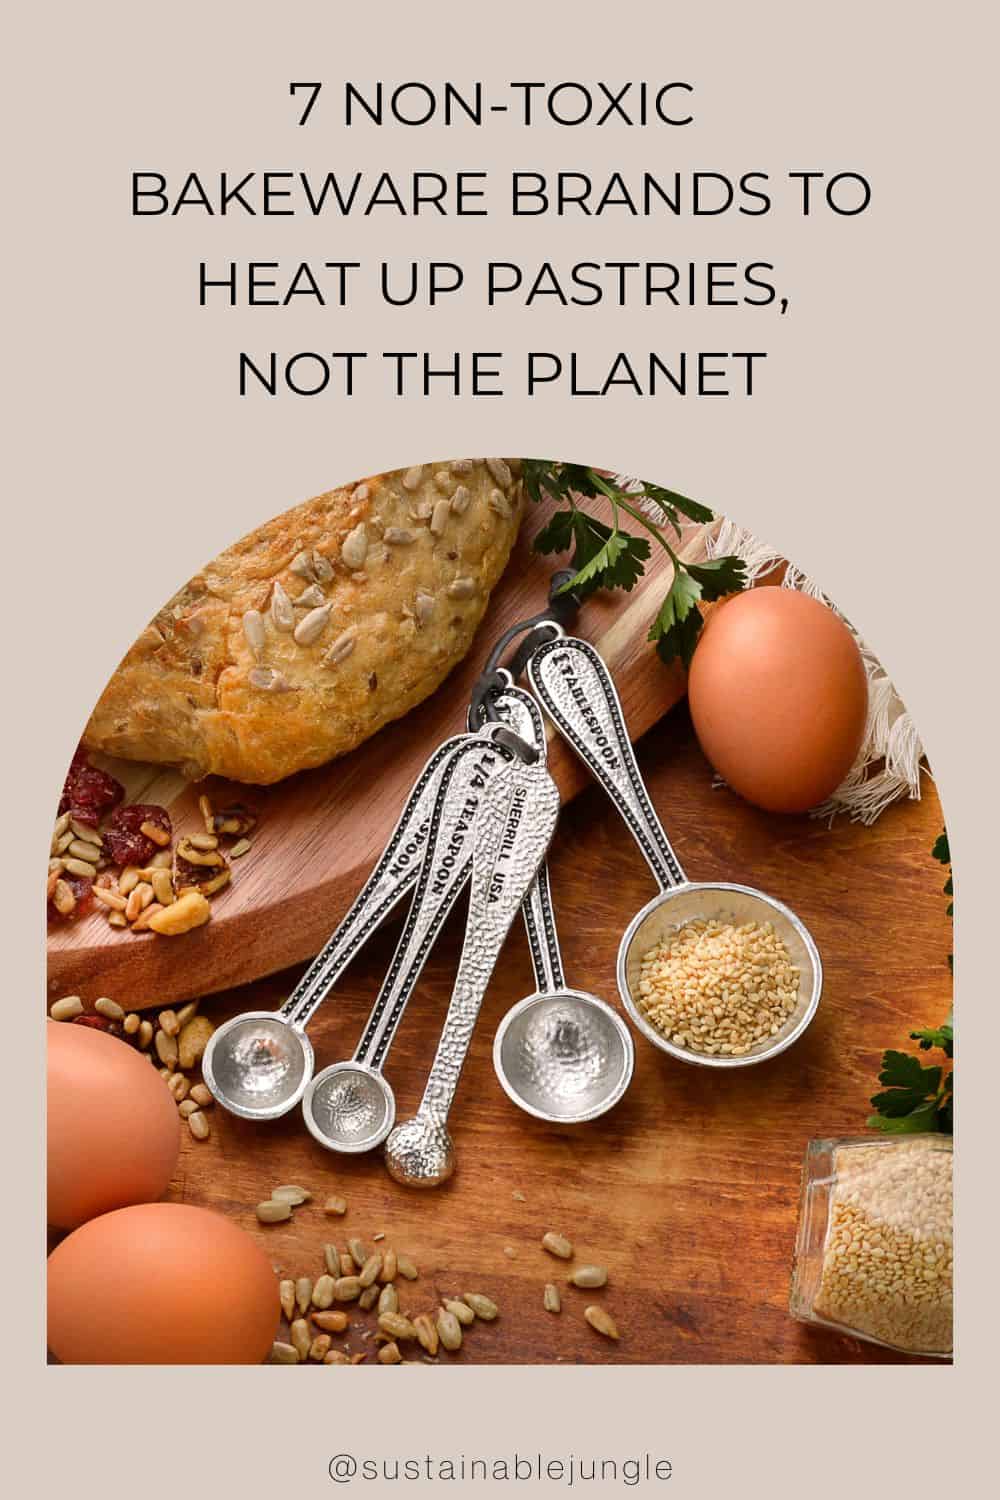 7 Non-Toxic Bakeware Brands to Heat Up Pastries, Not the Planet Image by 360 Cookware #nontoxicbakeware #bestnontoxicbakingsheets #nontoxicbakewarebrands #safebakeware #safestbakeware #nontoxicbakingpans #sustainablejungle